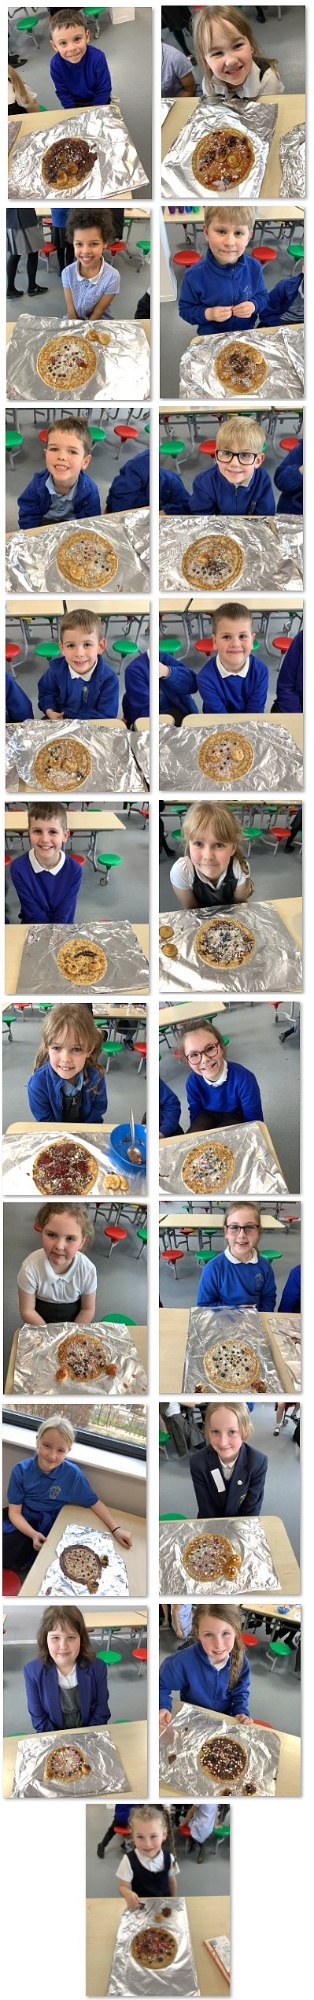 Photos of cooking club